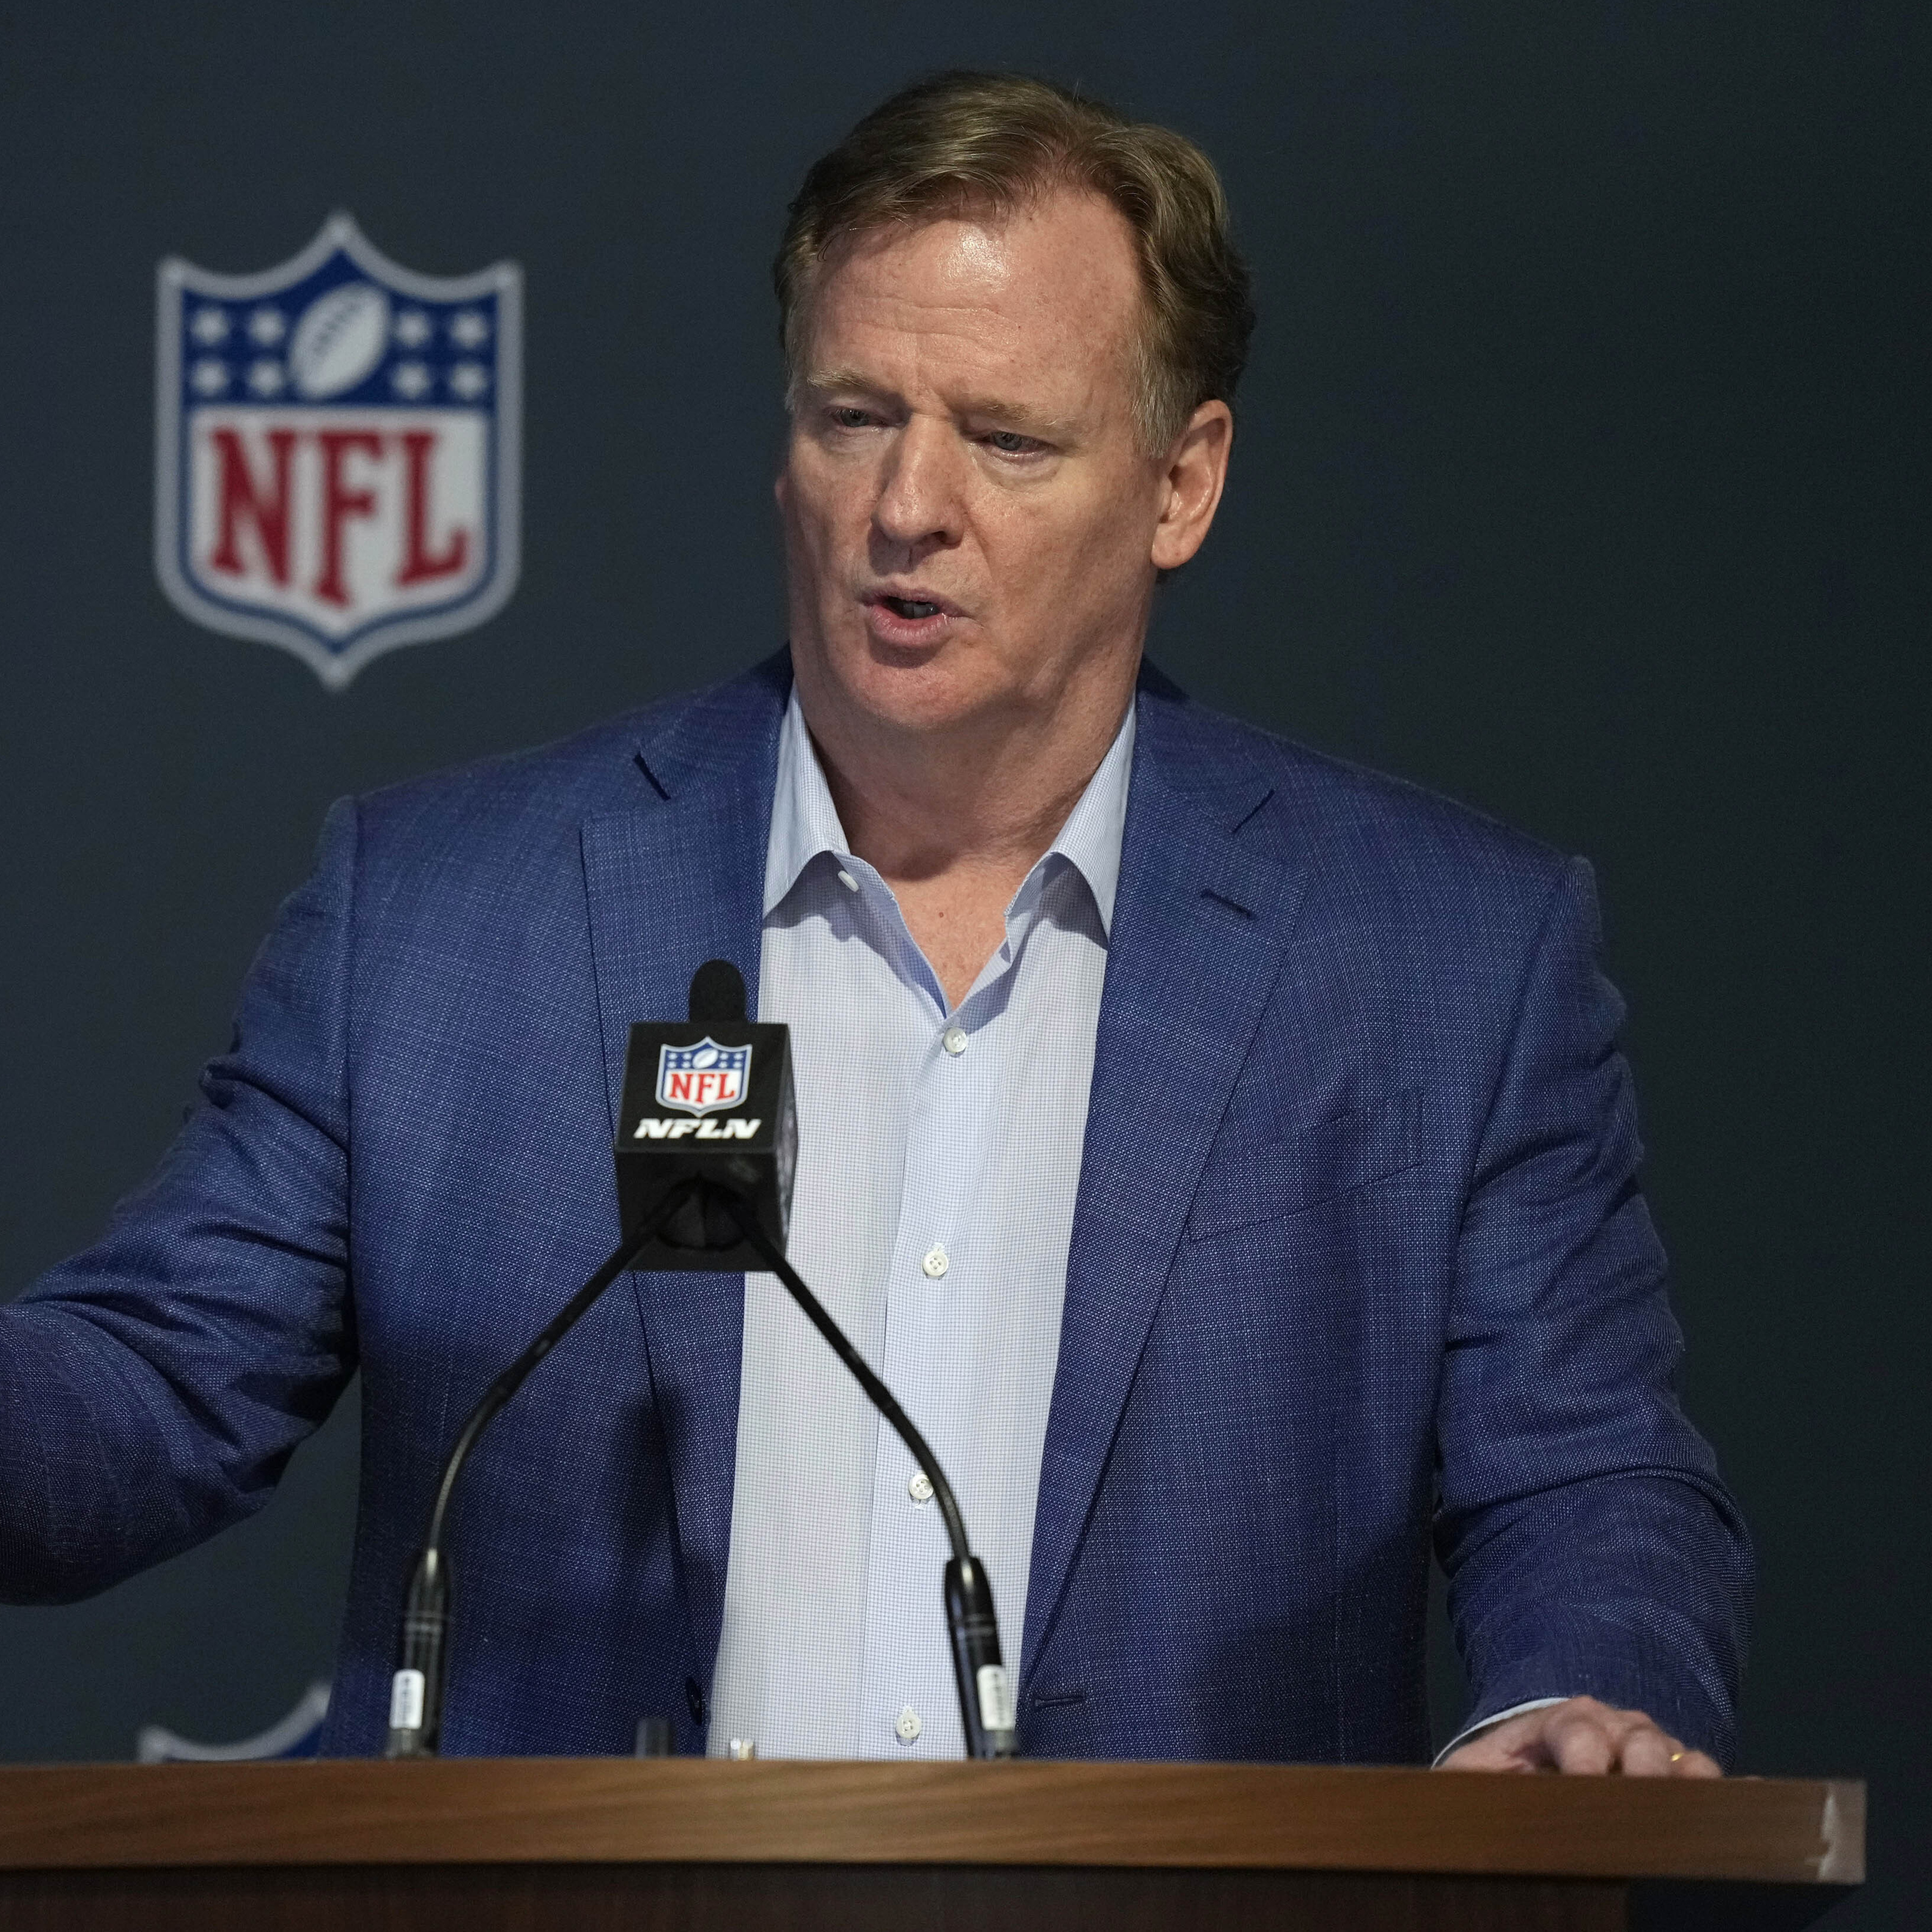 Roger Goodell: Commanders’ Workplace Culture Was ‘Unprofessional and Unacceptable’